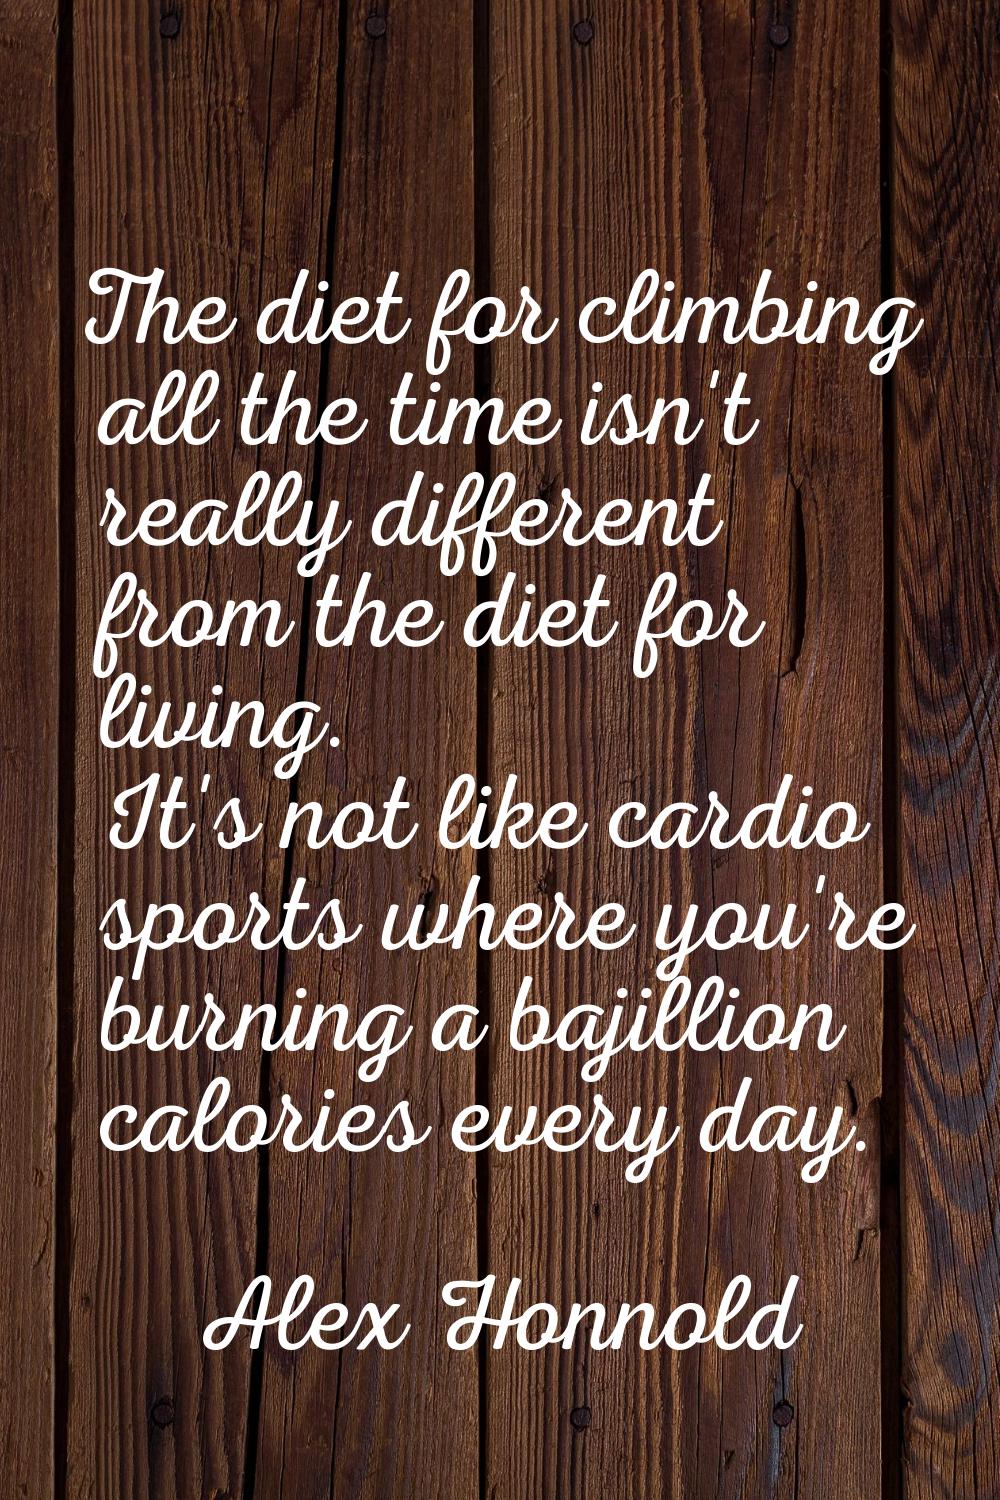 The diet for climbing all the time isn't really different from the diet for living. It's not like c